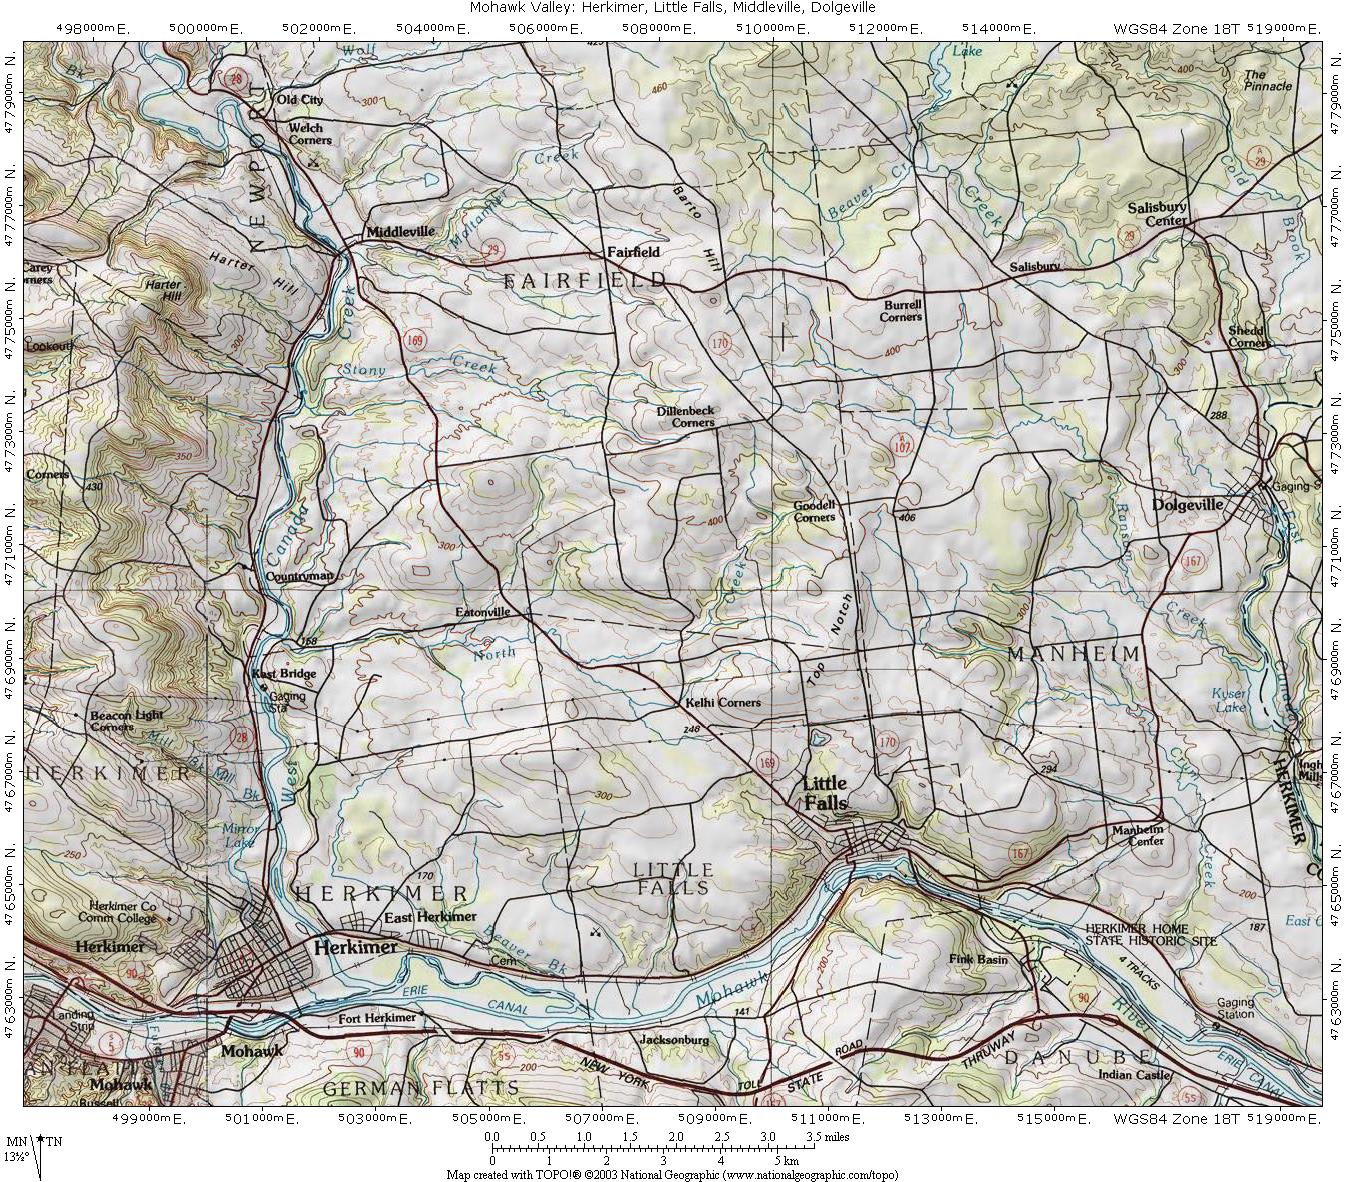 Road Map #1  Mohawk Valley: Herkimer, Little Falls, Middleville Topographic Map